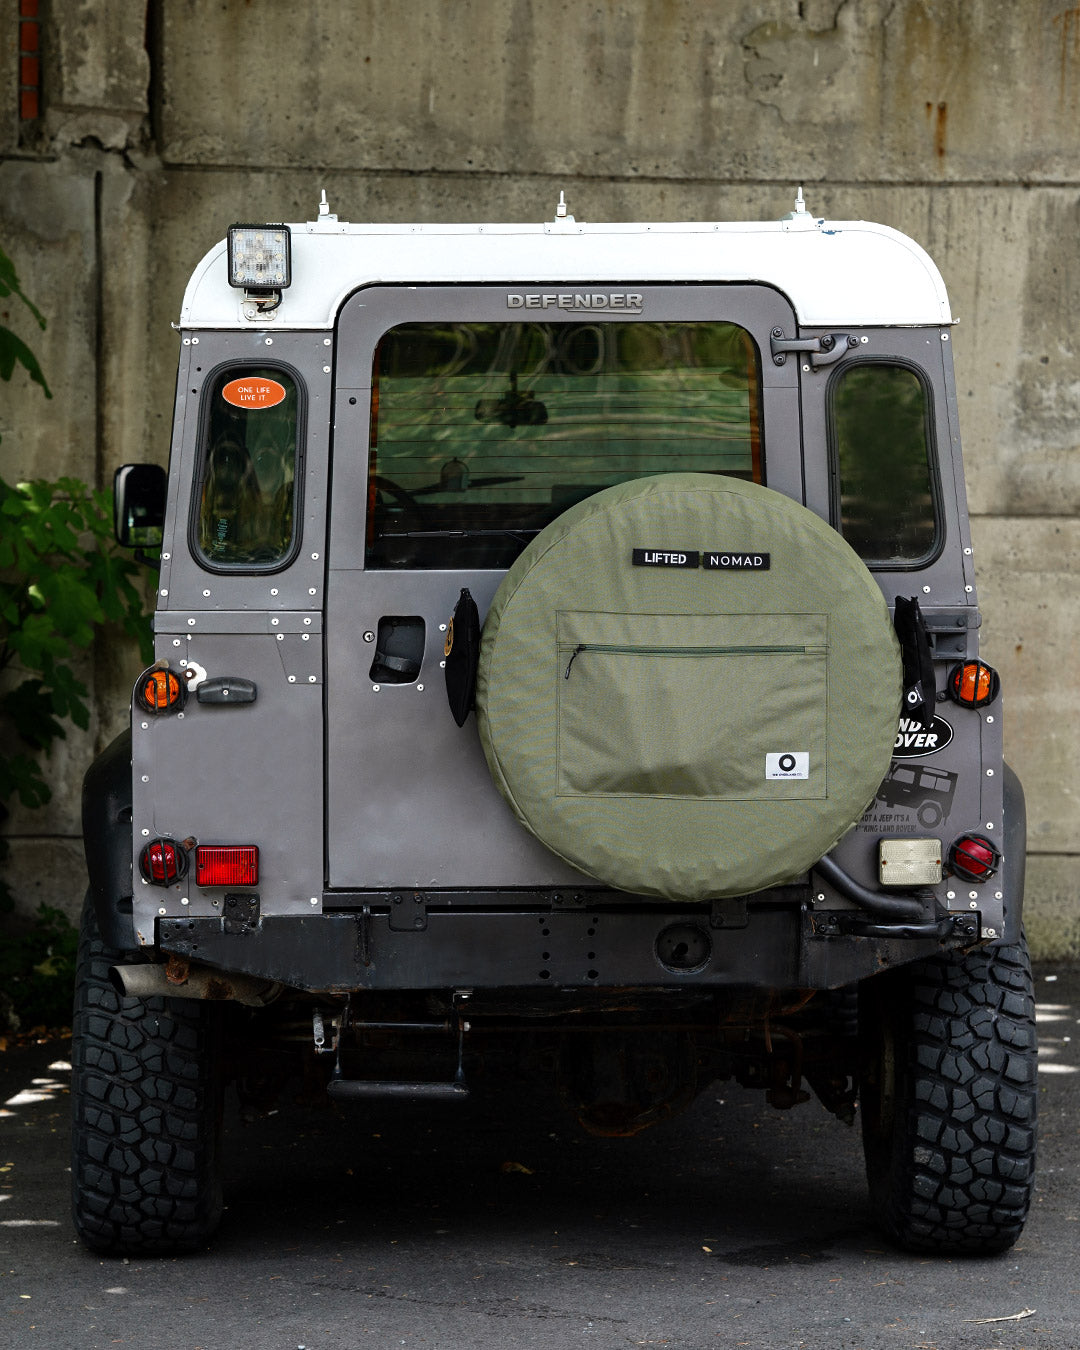 khaki tactical spare wheel cover with pocket